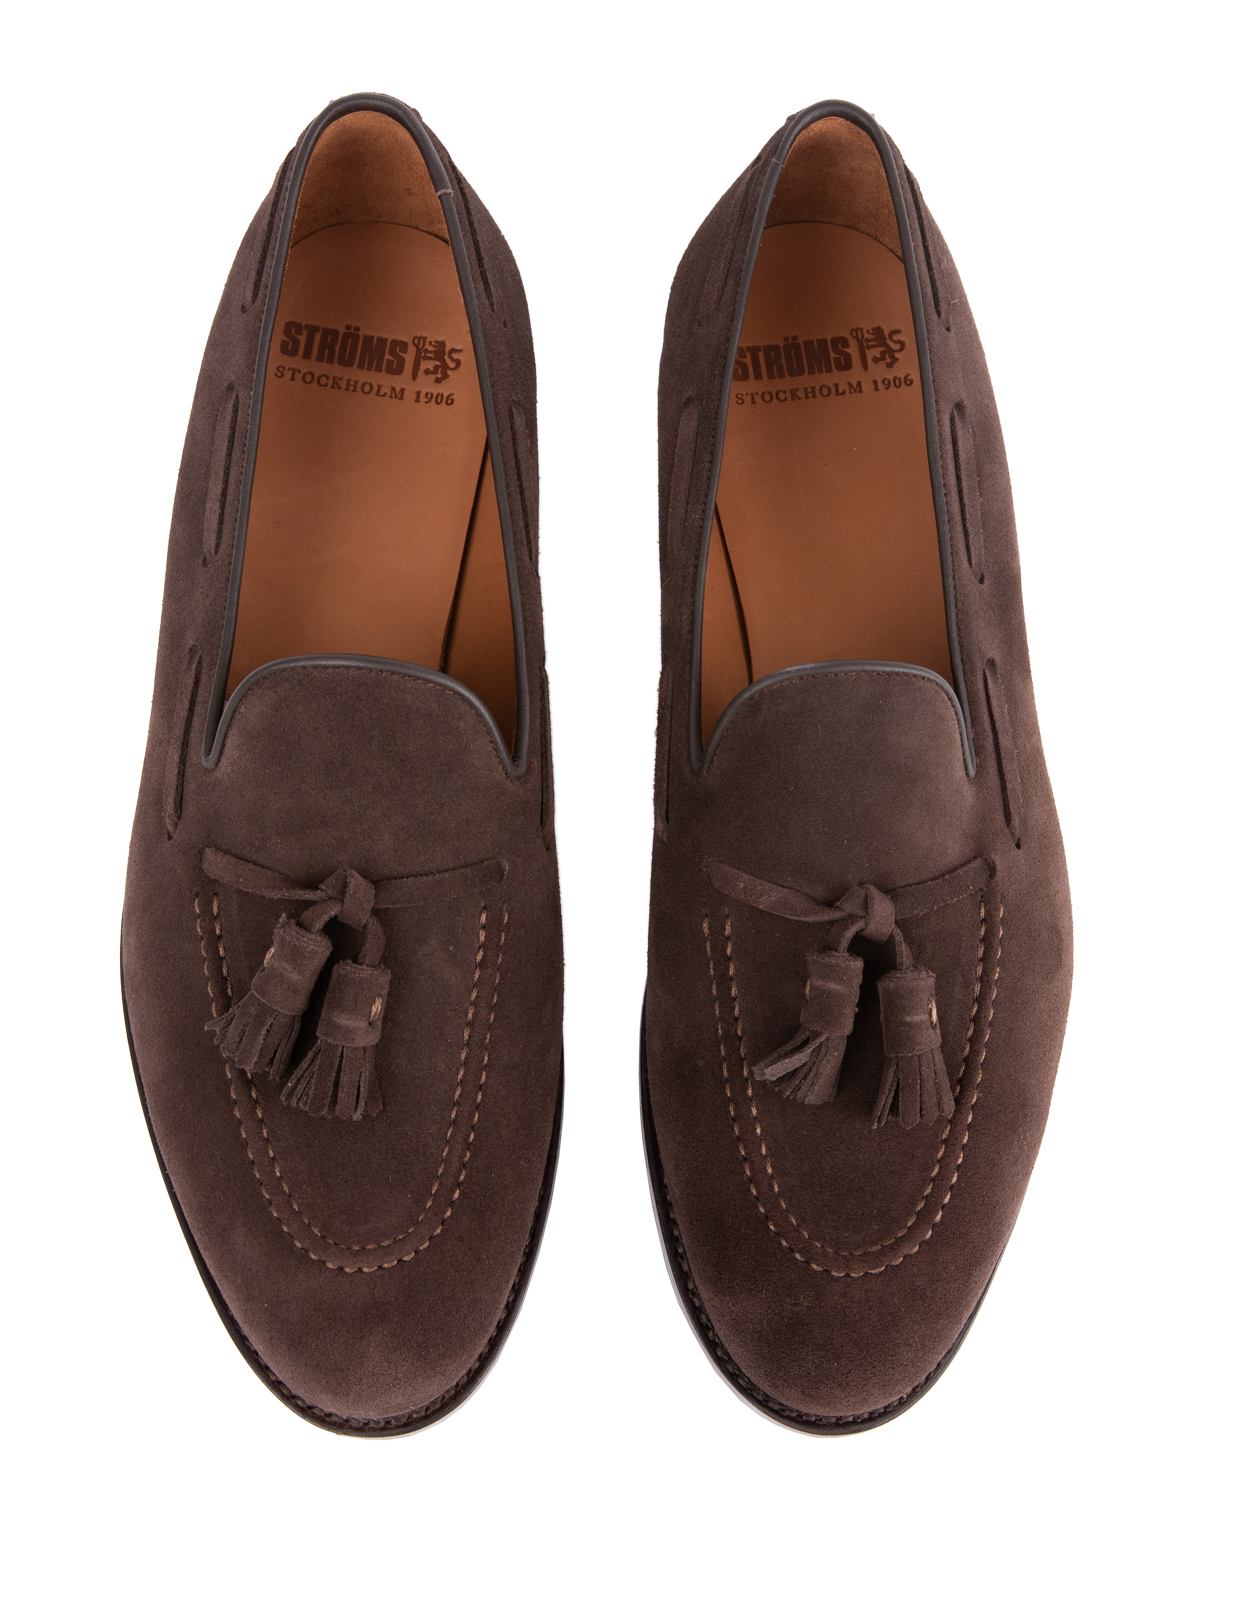 Tassel Loafers Suede Bitter Chocolate Stl 10.5